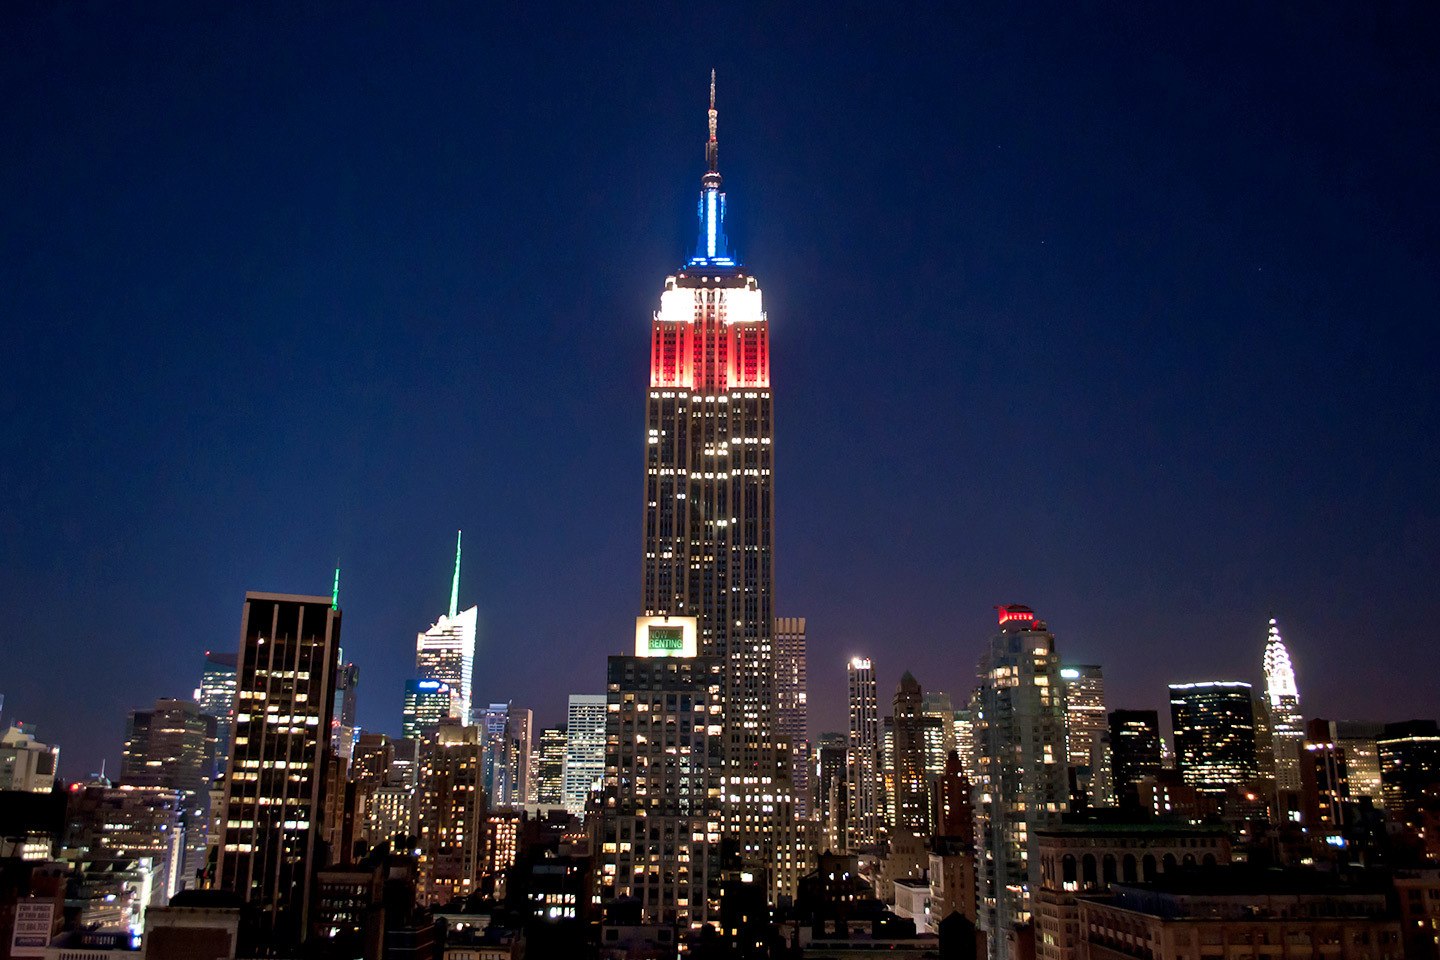 The Empire State Building at night, a New York film location